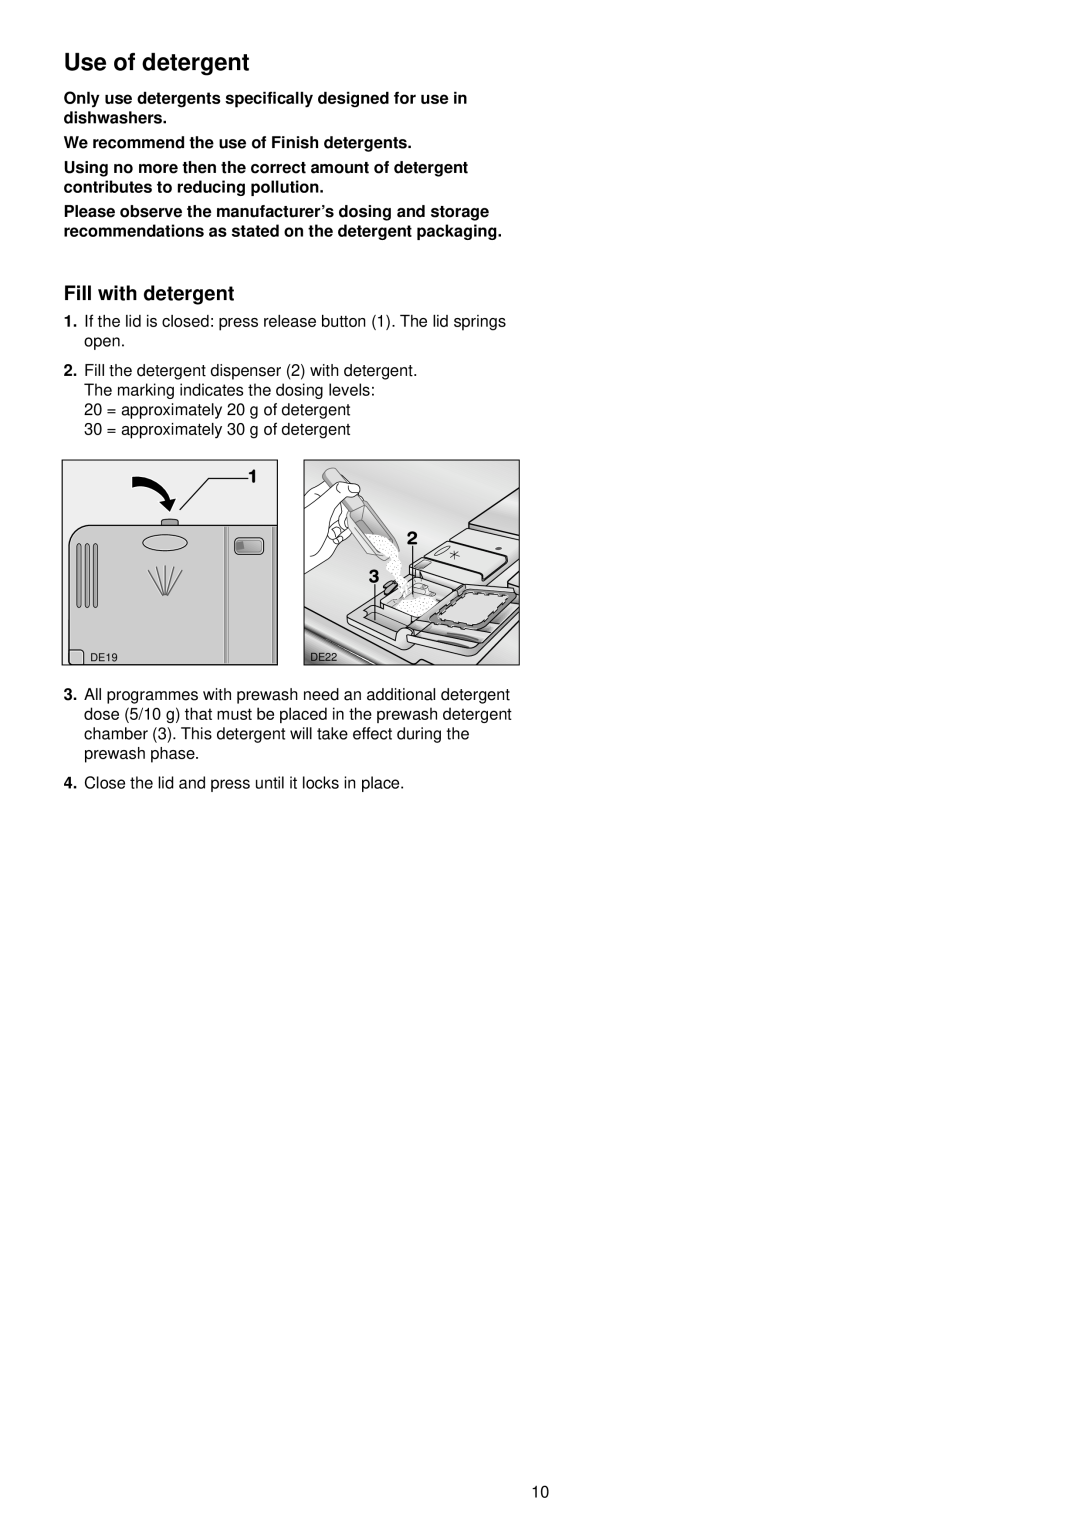 Zanussi ZSF 4123 S manual Use of detergent, Fill with detergent 